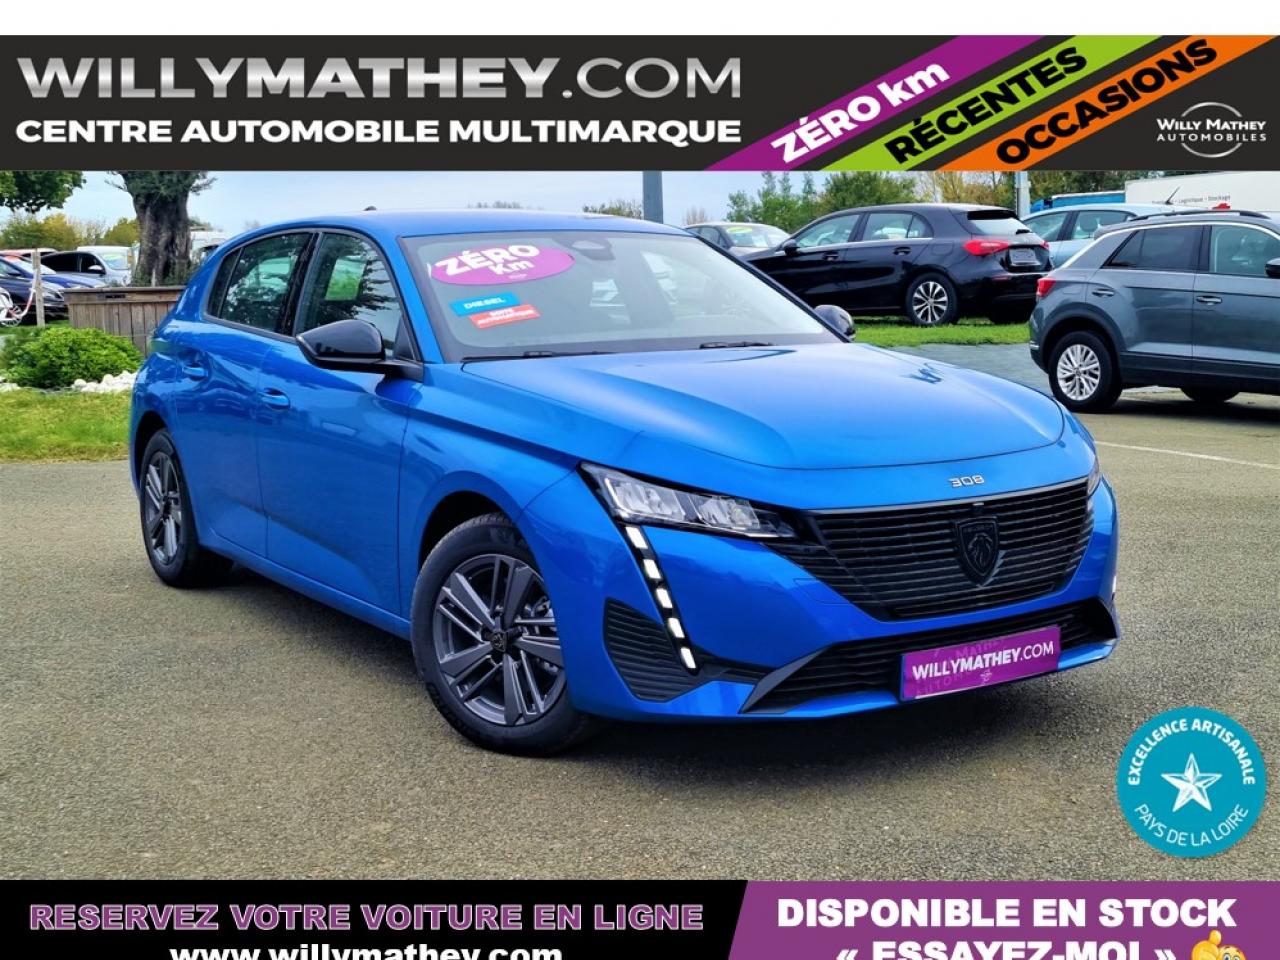 WILLY MATHEY AUTOMOBILES - PEUGEOT-308-DIESEL 130CV BOITE